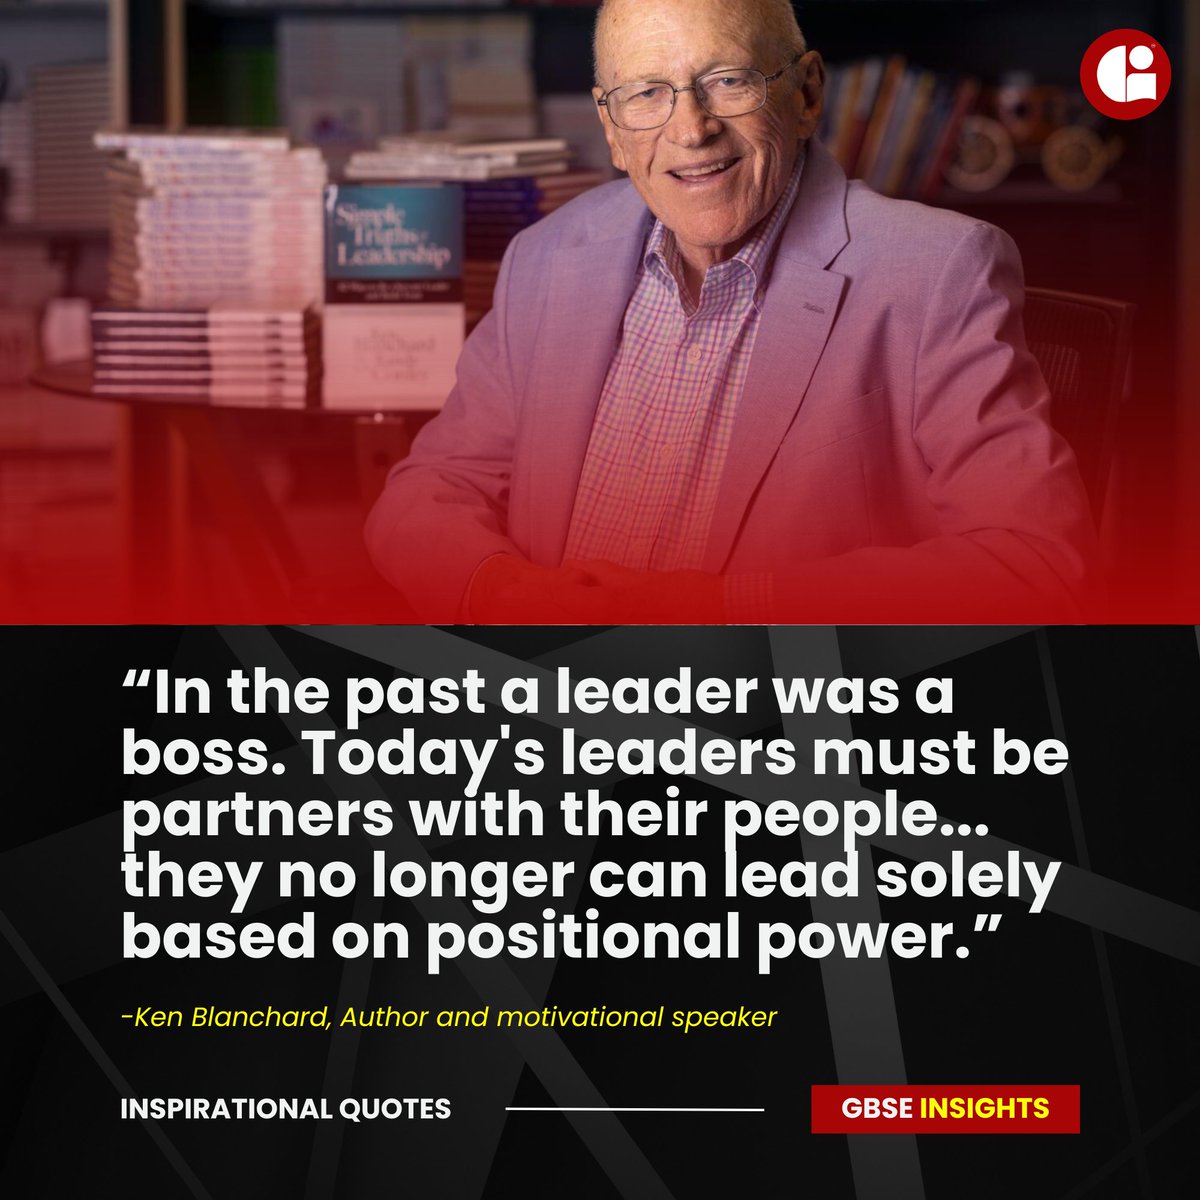 Leadership is evolving, and so are we. Ken Blanchard reminds us that the essence of true leadership lies in partnership and influence, not authority. Unlock more such wisdom and join a community of forward-thinkers. Follow GBSE for daily insights. #LeadershipEvolved